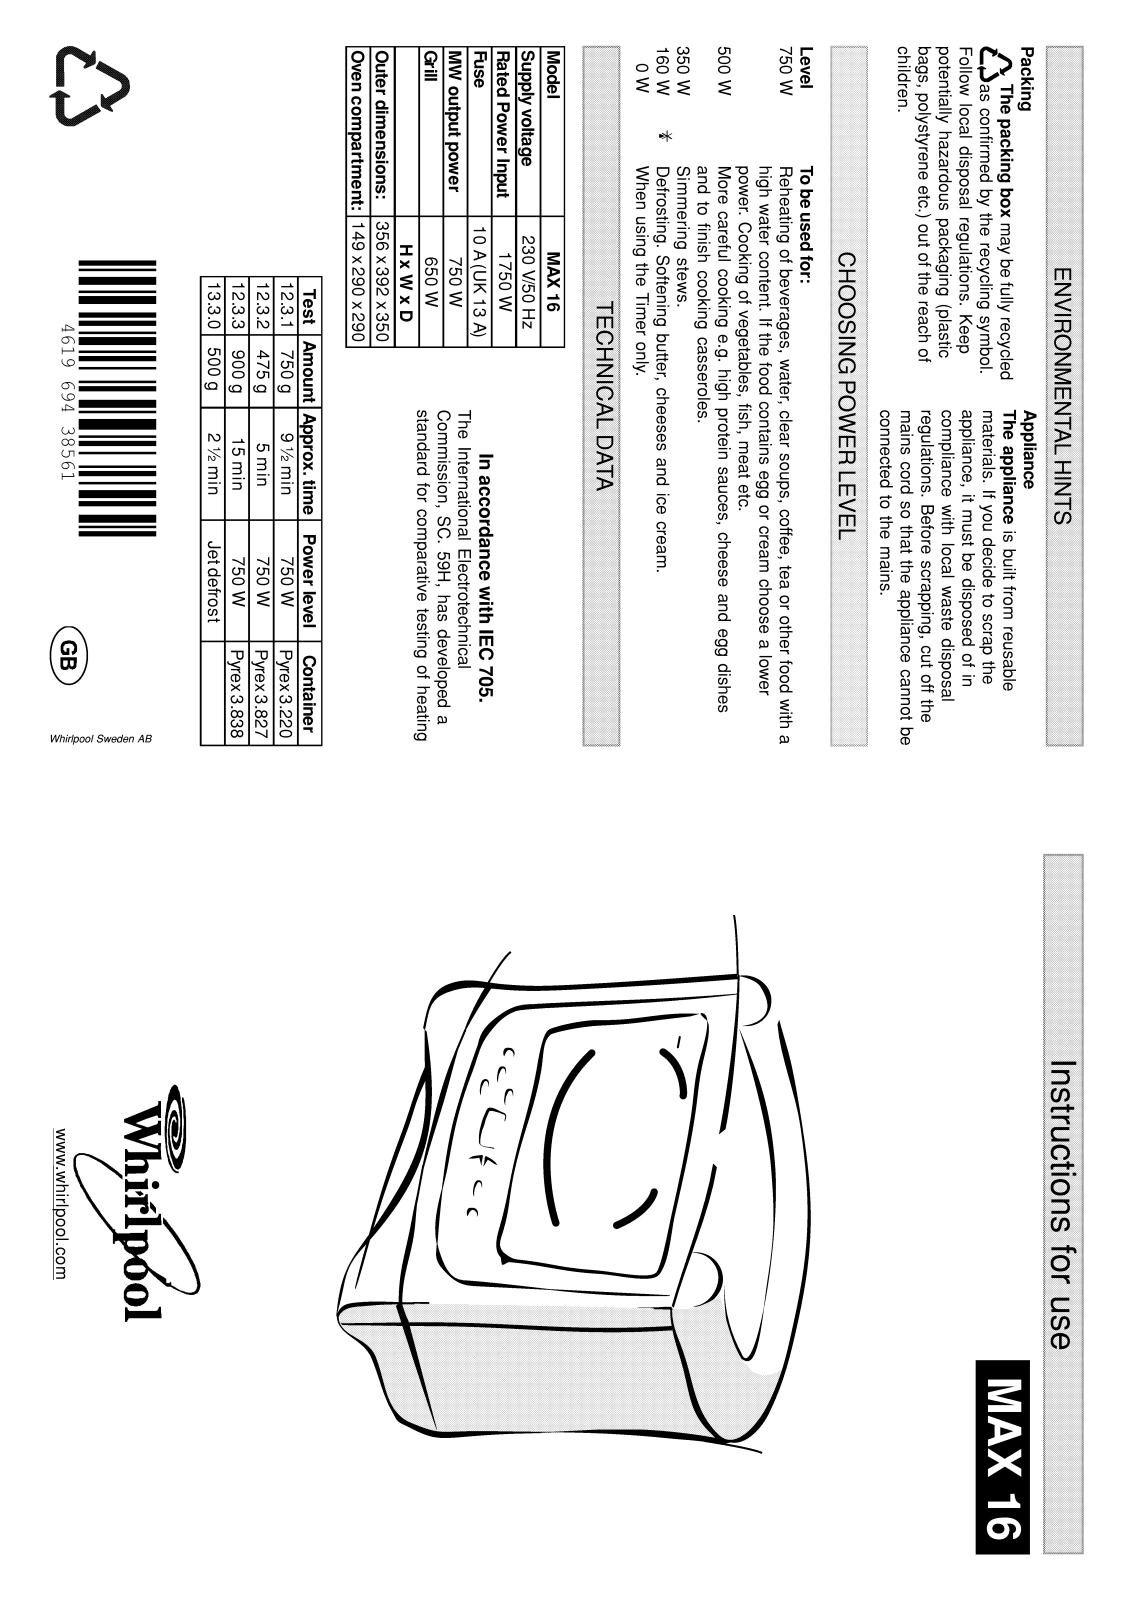 Whirlpool MAX 16/WH/2, MAX 16/BL, MAX 16/WH, MAX 16/2/BL INSTRUCTION FOR USE